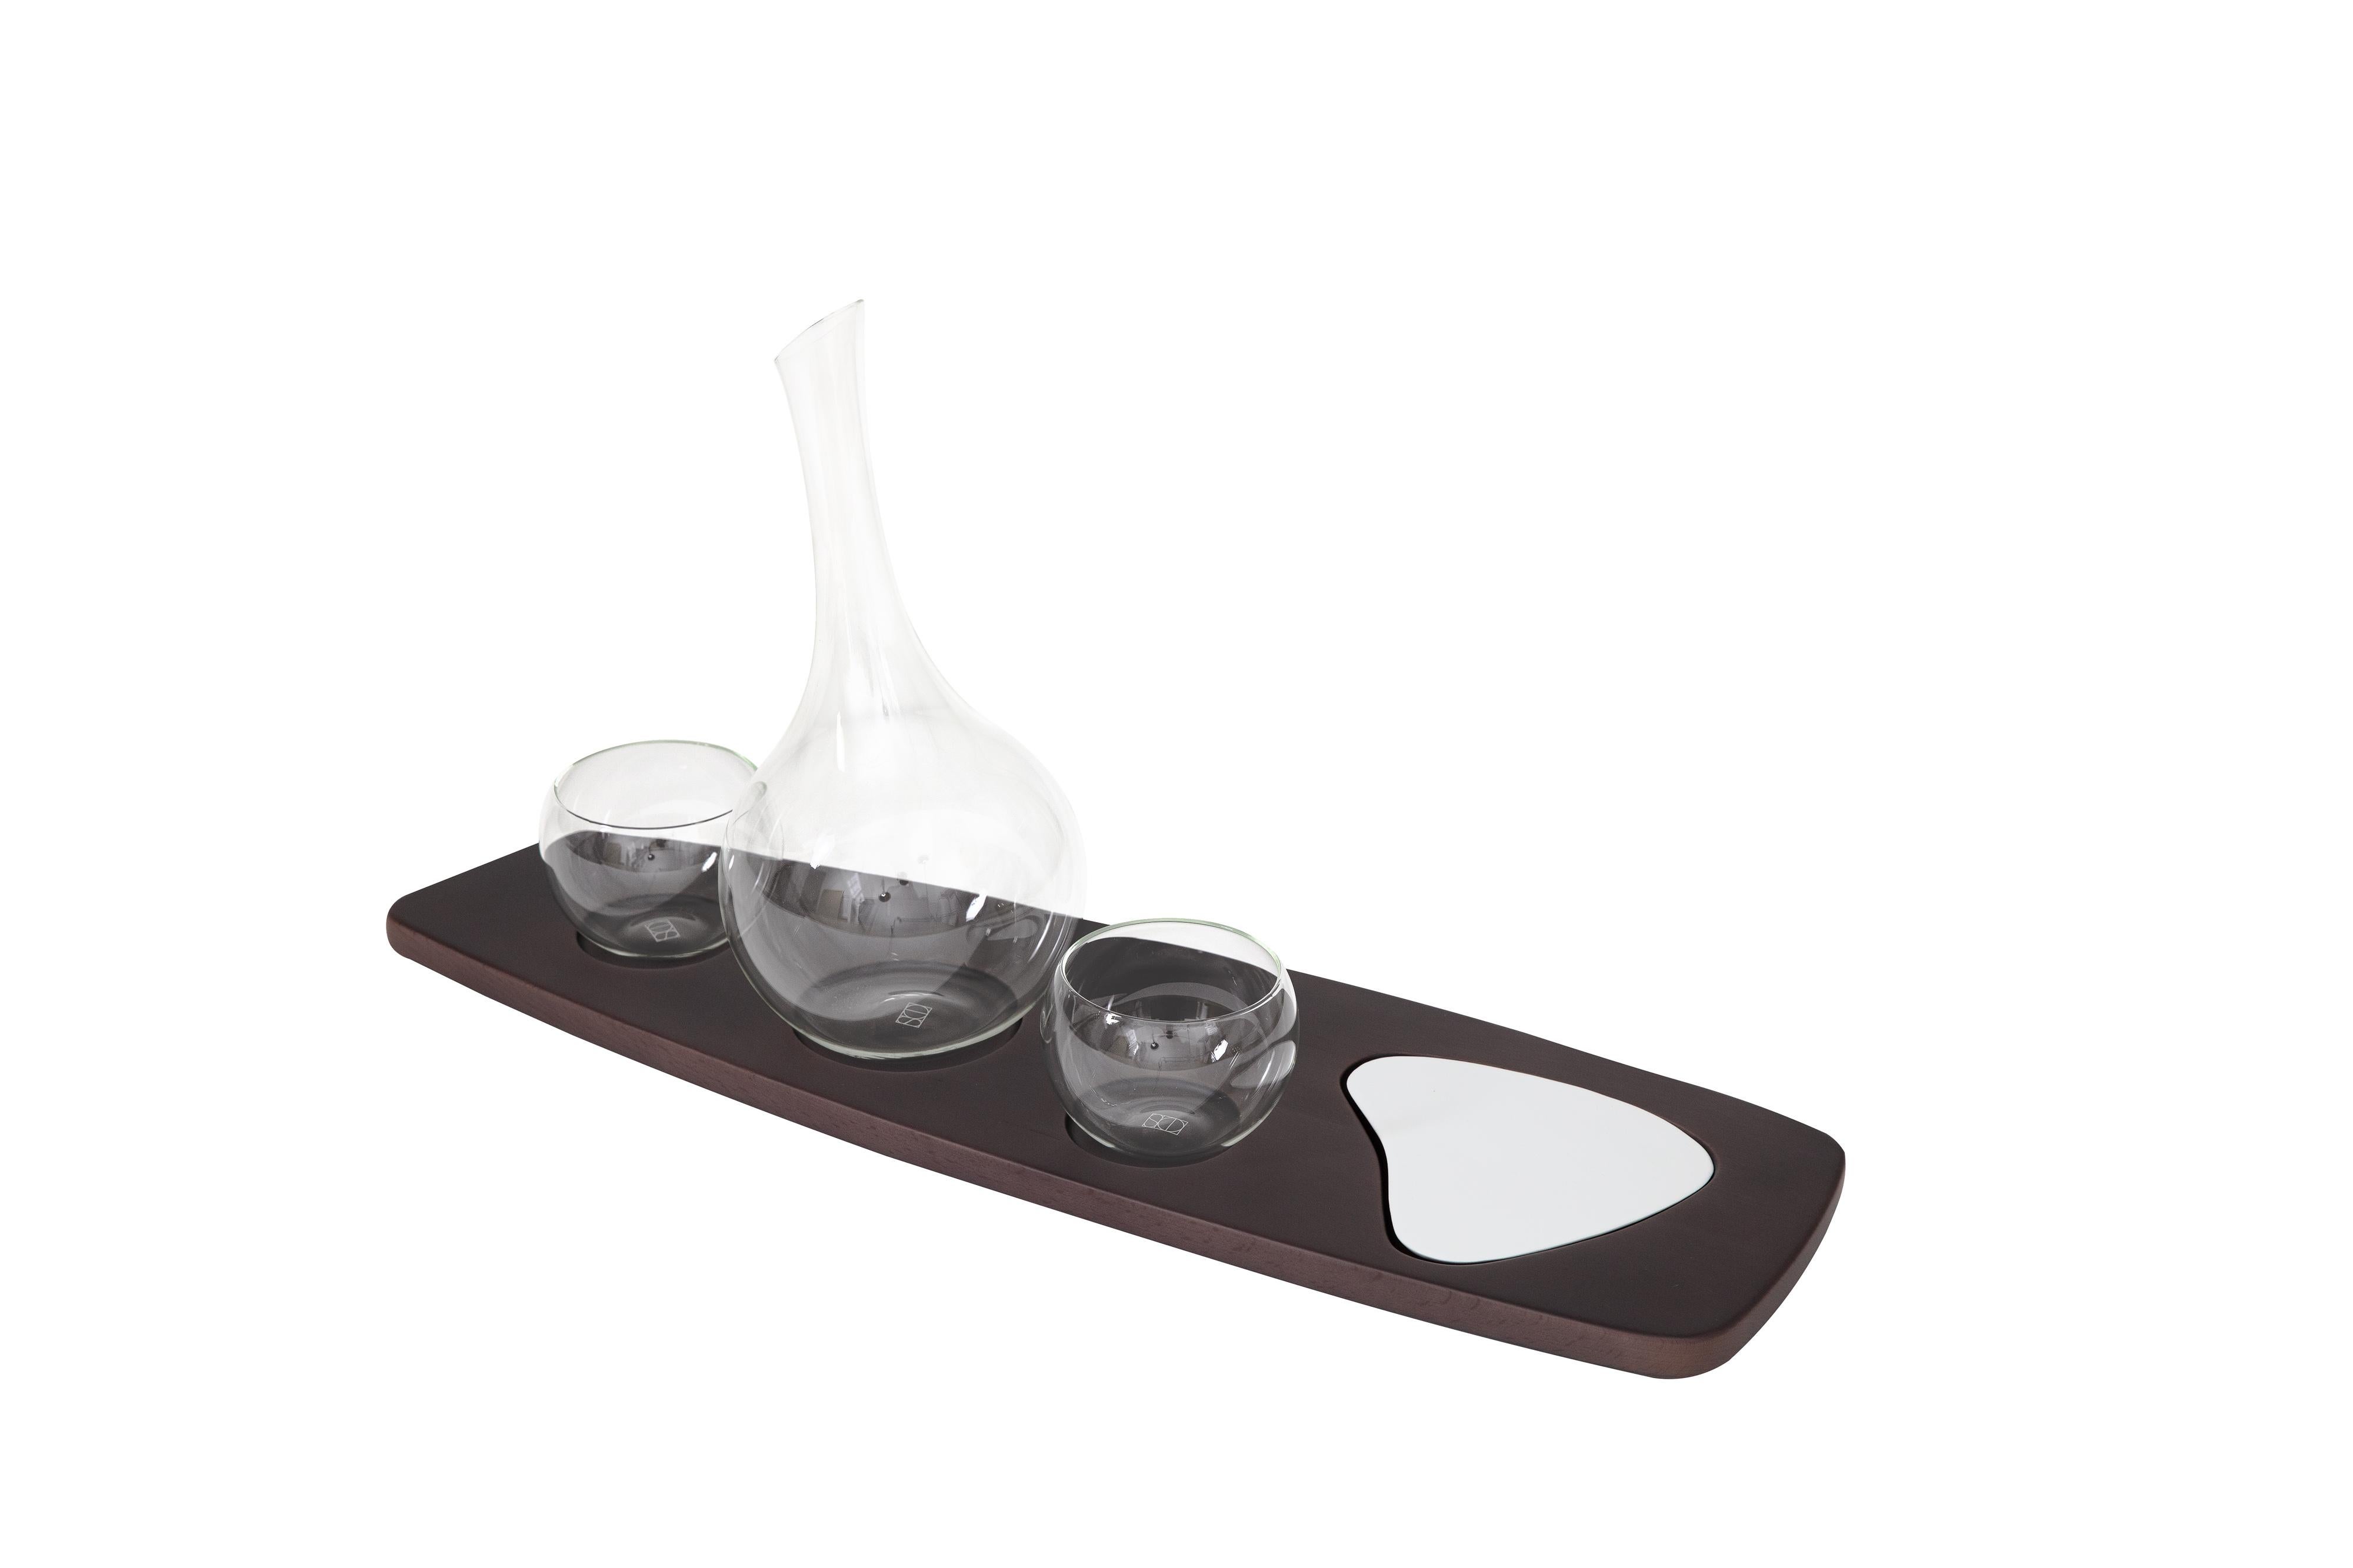 The wine service set is comprised of an organically shaped hand-blown borosilicate glass wine decanter and two glasses that nestle into a slender linear solid beech wood tray complete with a hand-molded white ceramic appetizer plate. 

The Pok